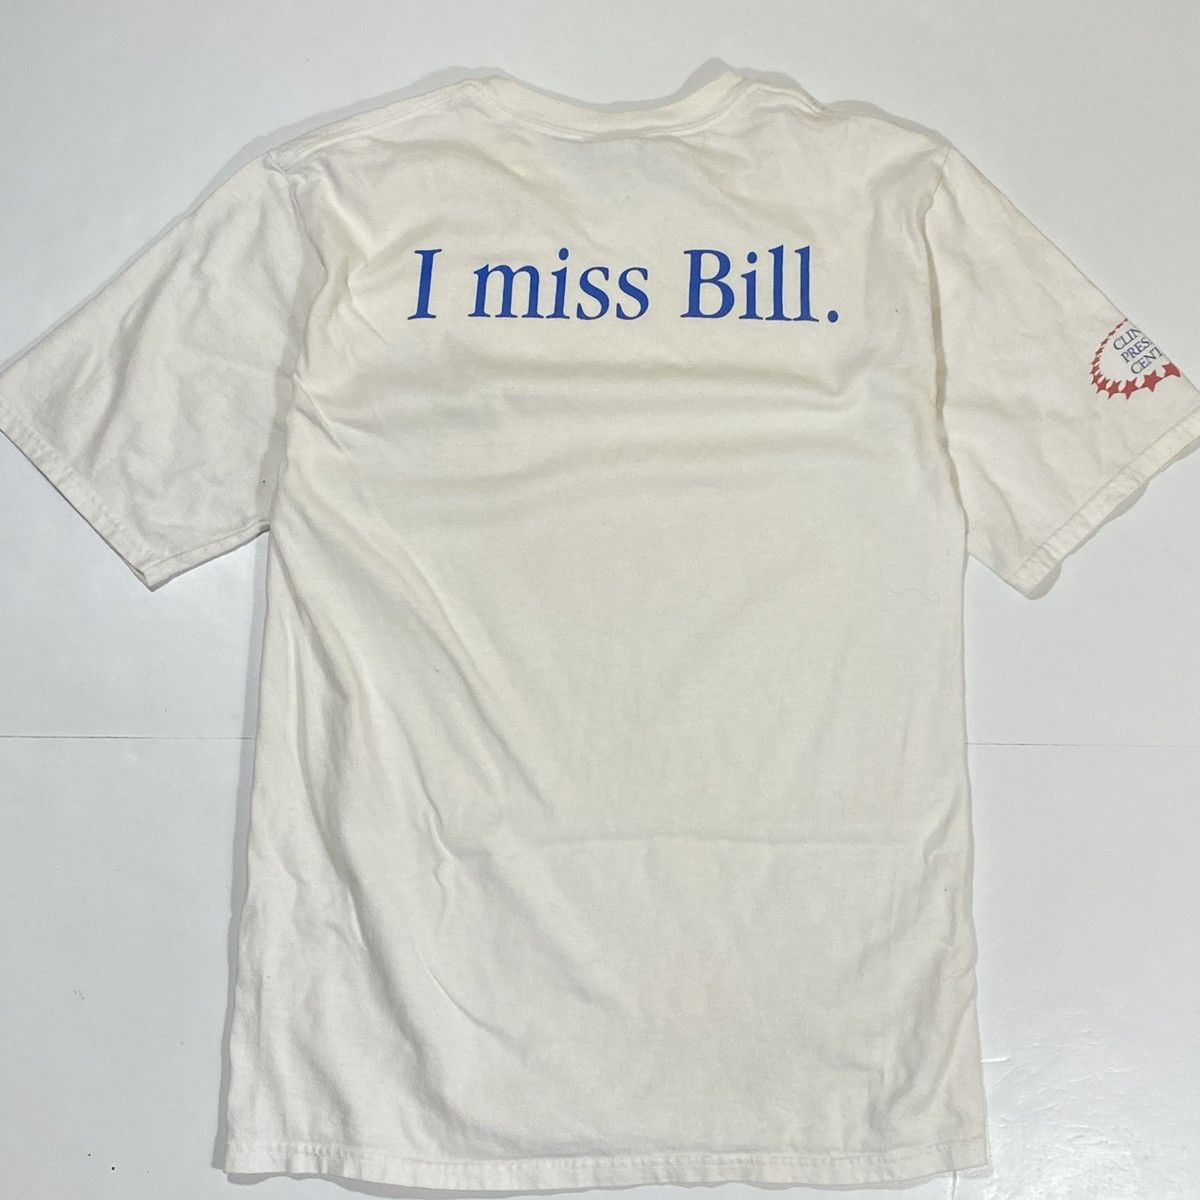 Vintage 90’s I Miss Bill Tee Shirt Size US S / EU 44-46 / 1 - 2 Preview